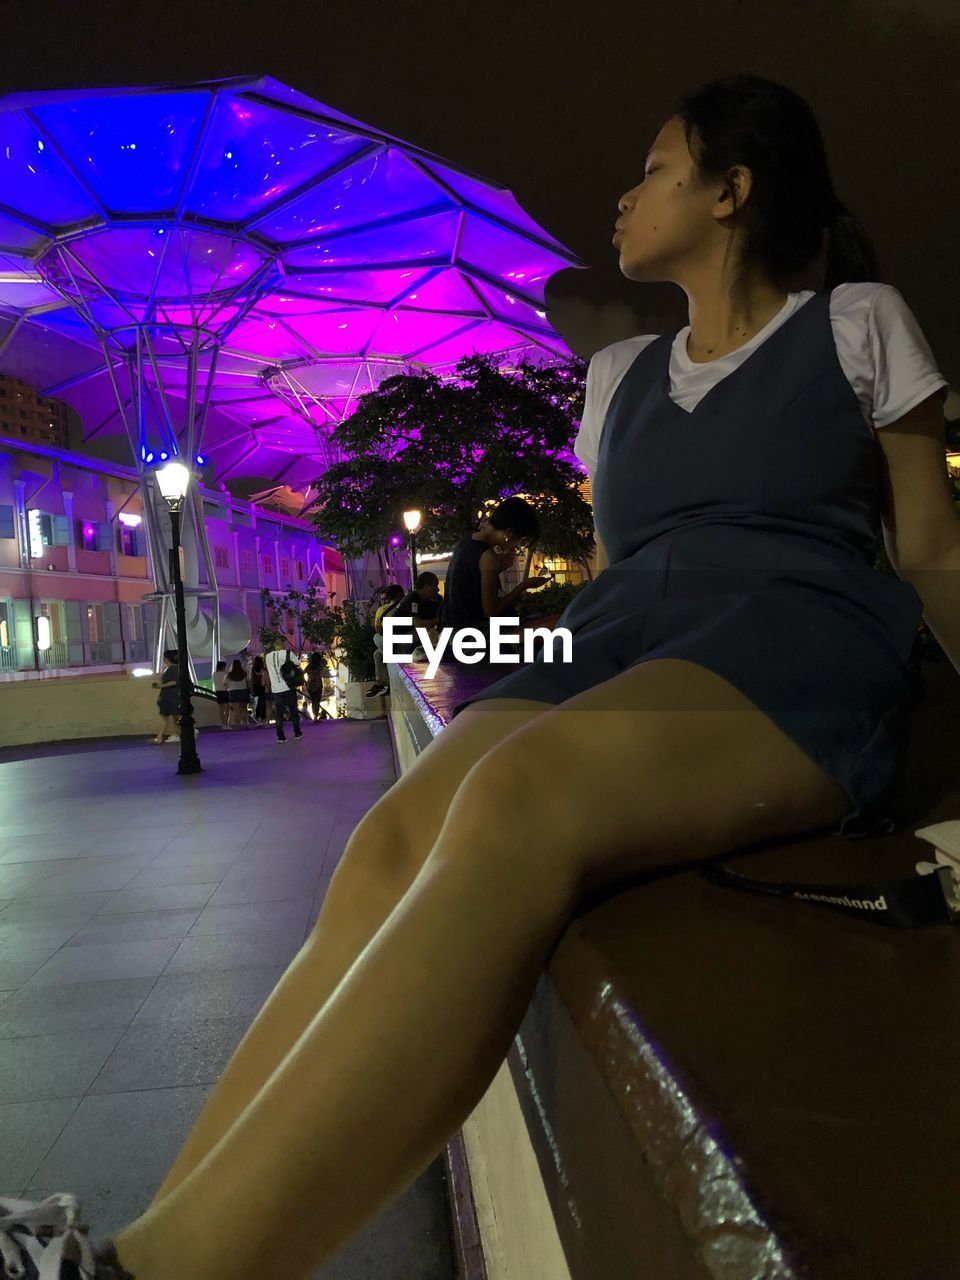 SIDE VIEW OF WOMAN SITTING IN ILLUMINATED PARK